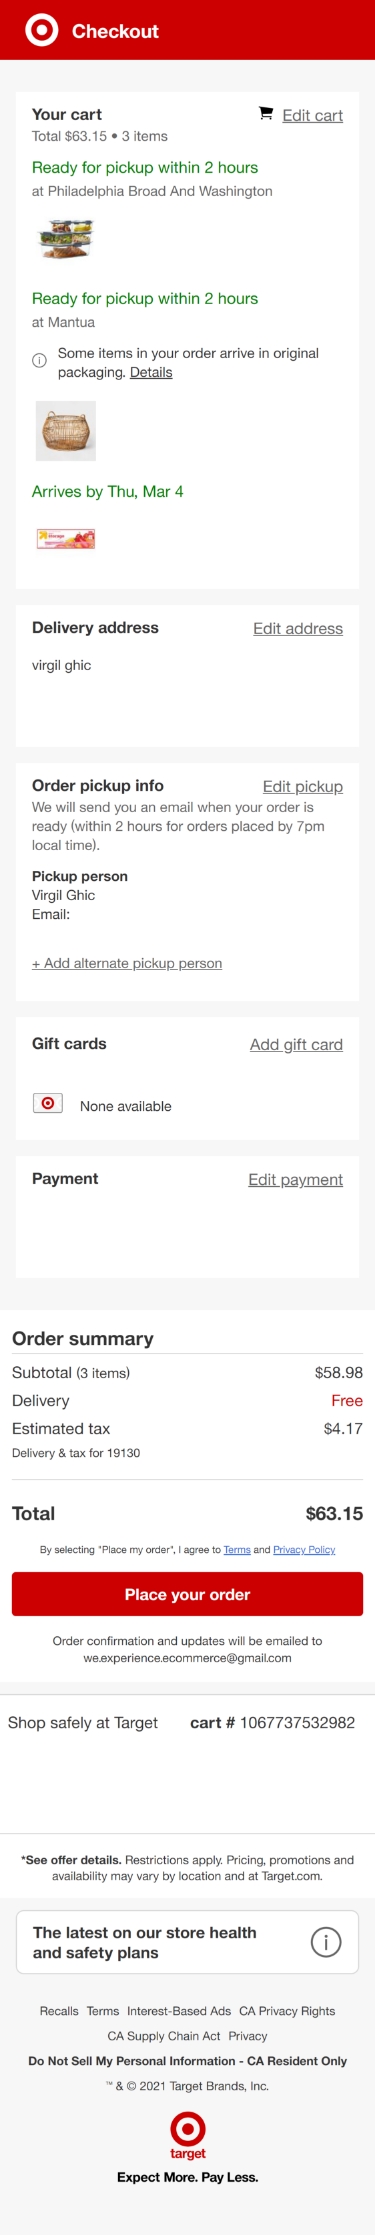 target checkout page mobile